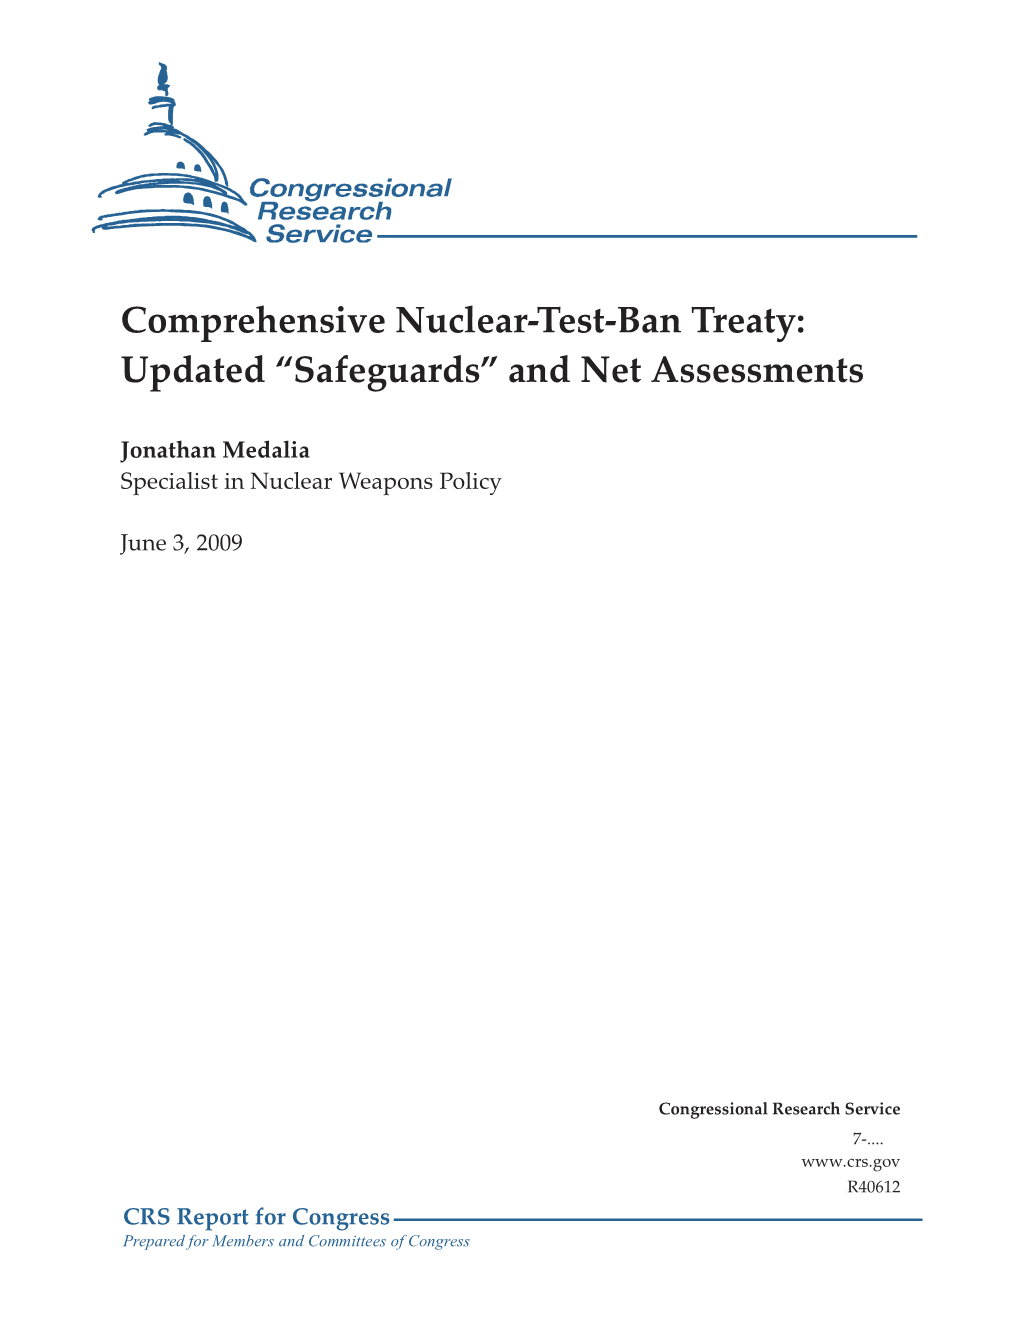 Comprehensive Nuclear-Test-Ban Treaty: Updated “Safeguards” and Net Assessments